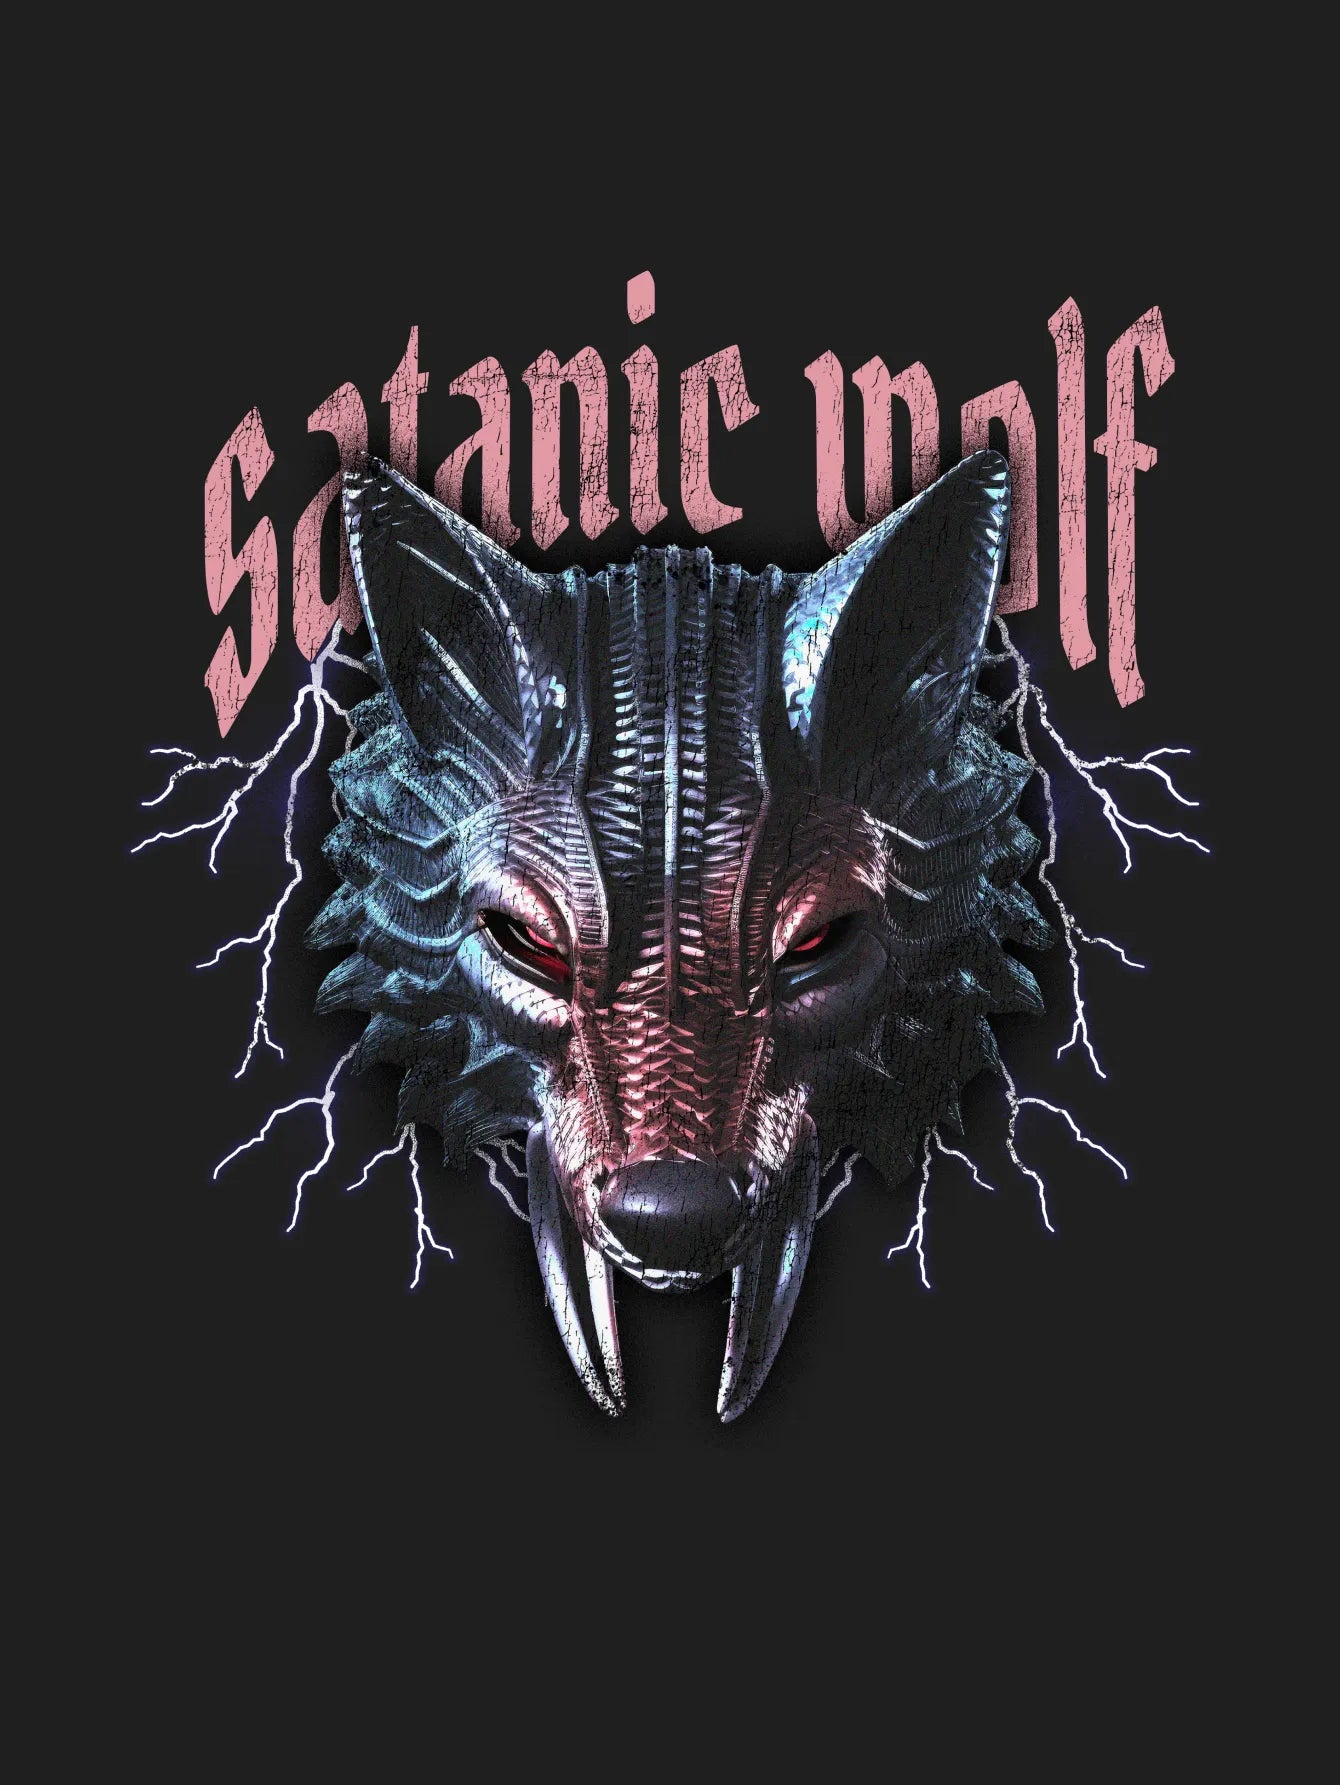 A Wolf Mask and Quote "Satanic Wolf"